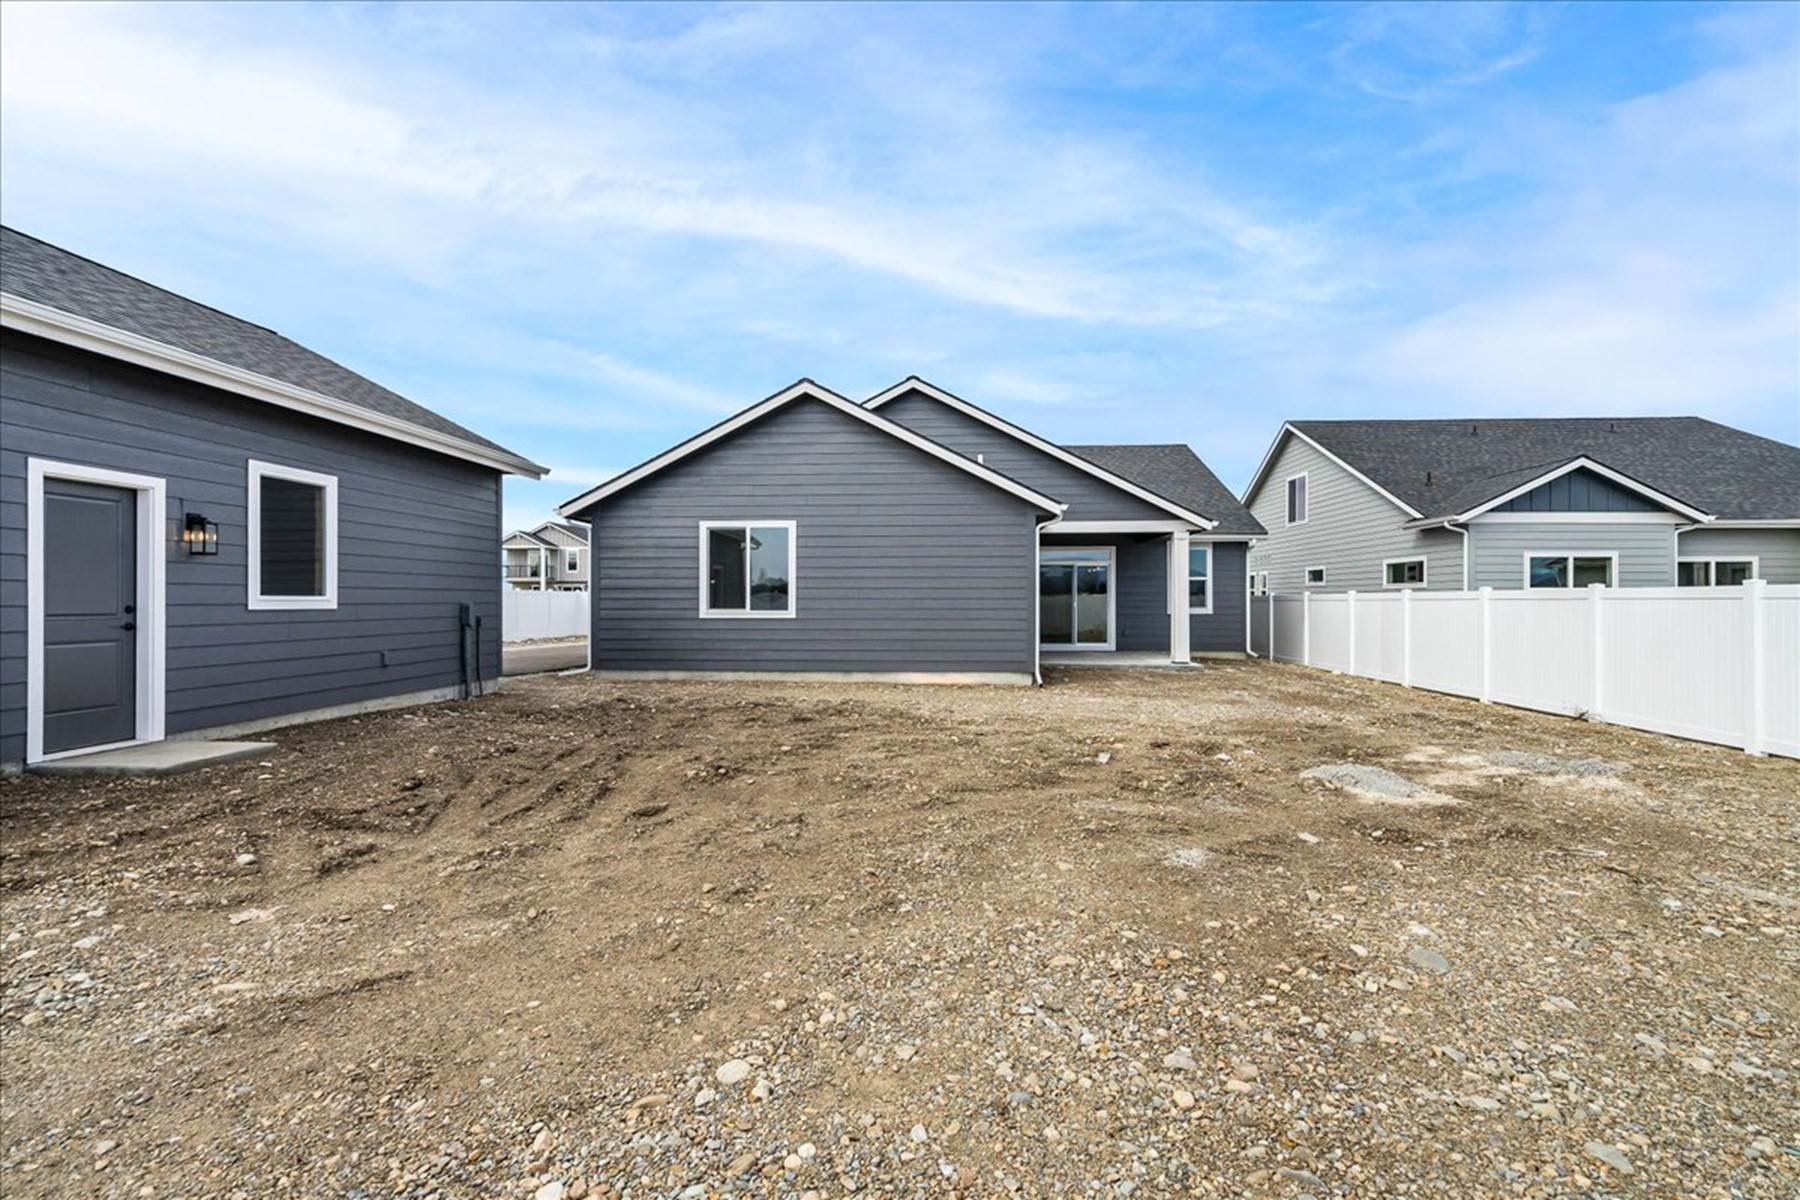 32. Single Family Homes for Sale at The Katmai w/Add'l Detatched Garage 2962 N Andromeda St Post Falls, Idaho 83854 United States